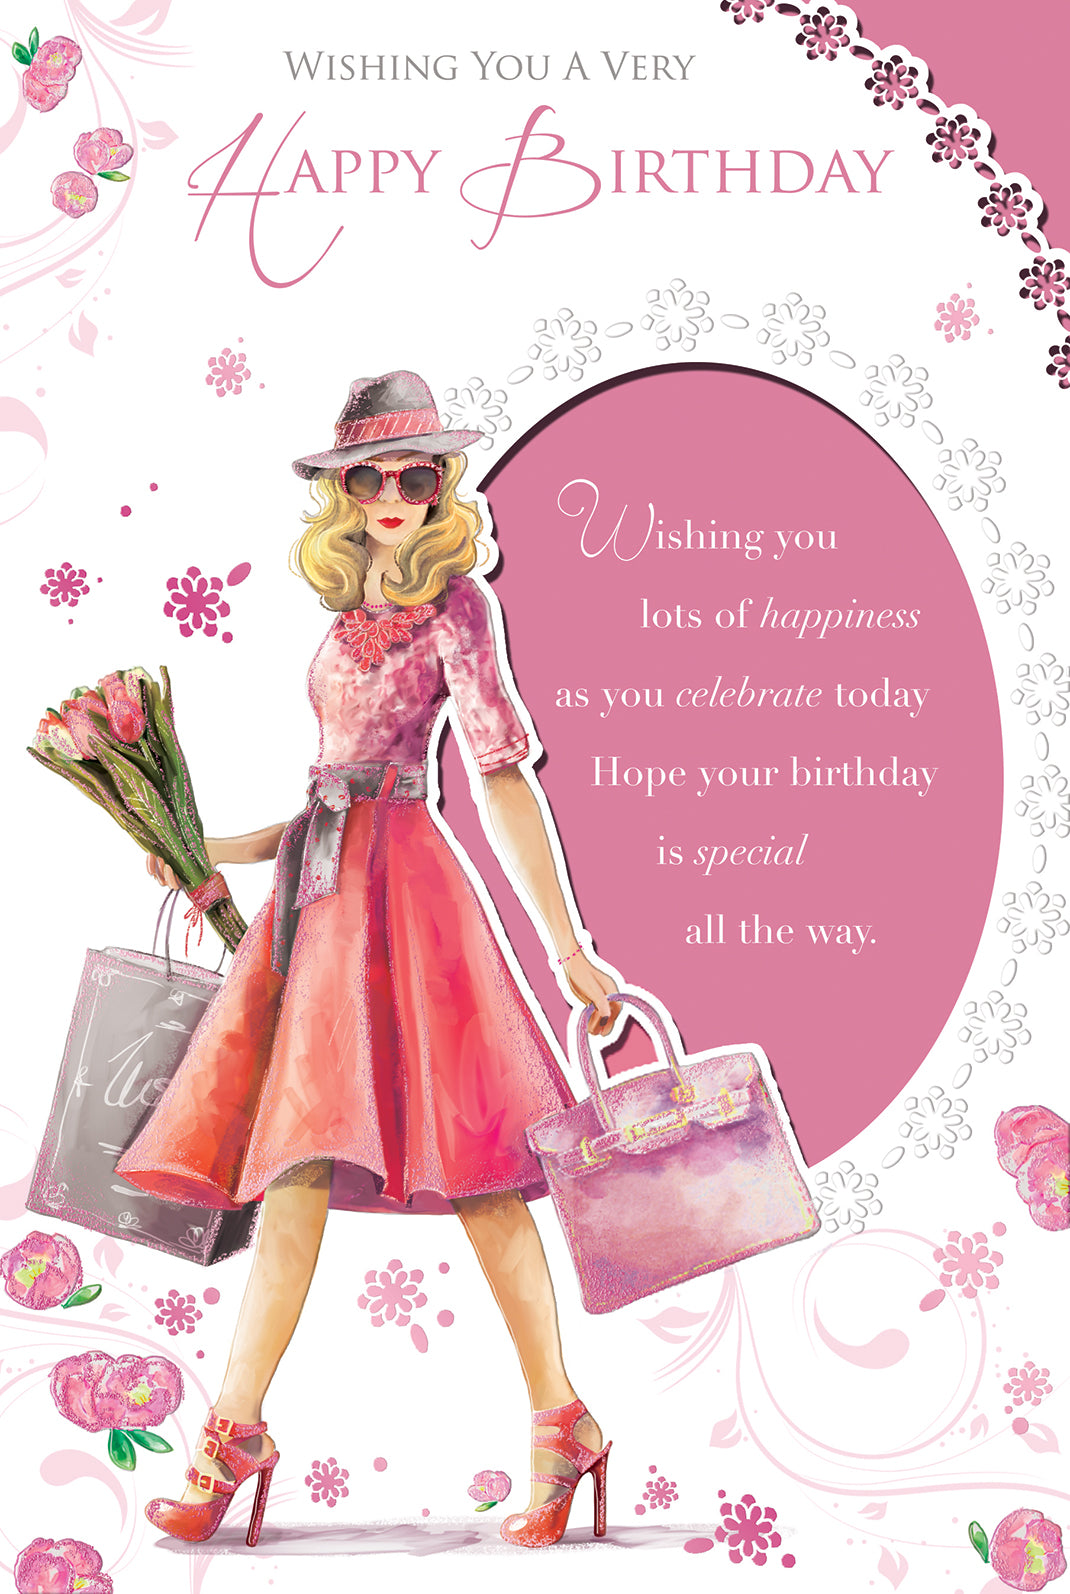 happy birthday images for a woman